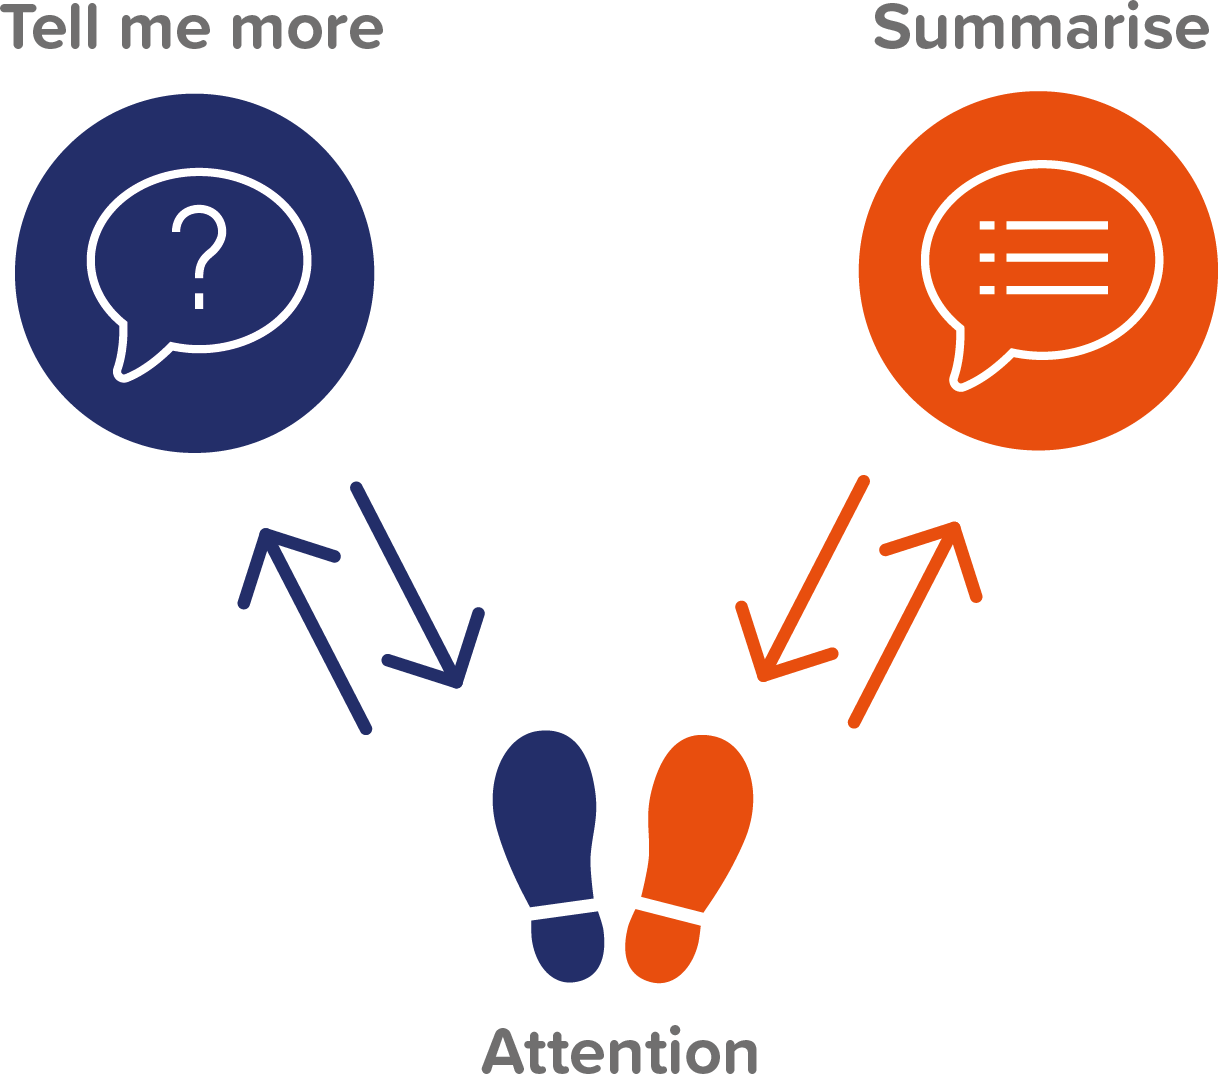 The Coaching Two-Step Diagram has two feet at the bottom to signify attention. To the left is a speech bubble with a question mark inside it to signify 'tell me more' and to the left is another speech bubble with lines inside it to signify summarise.